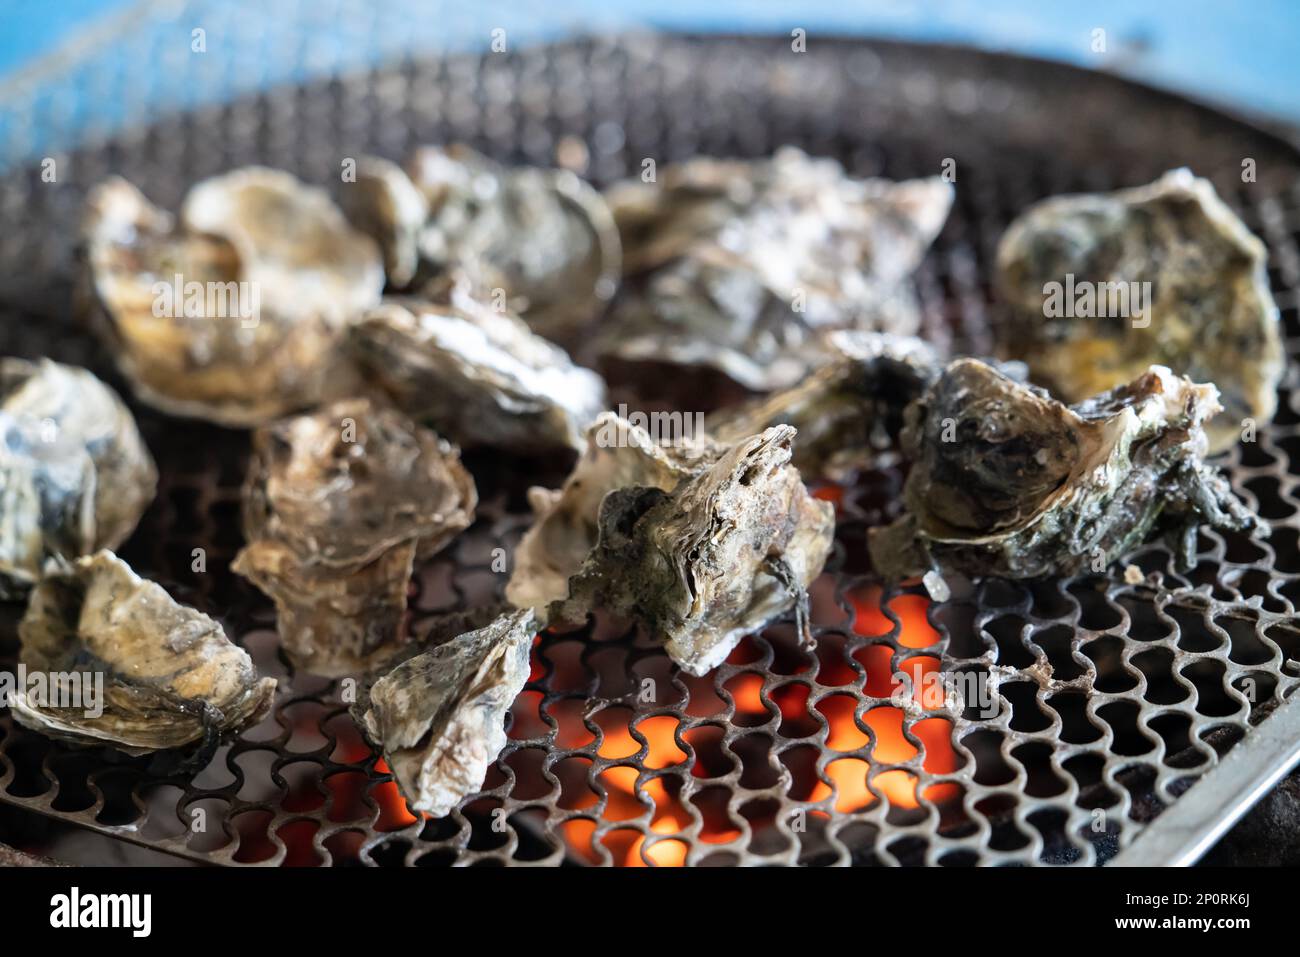 Grilled fresh oyster in Tainan, Taiwan, the famous Taiwanese street food gourmet. Stock Photo